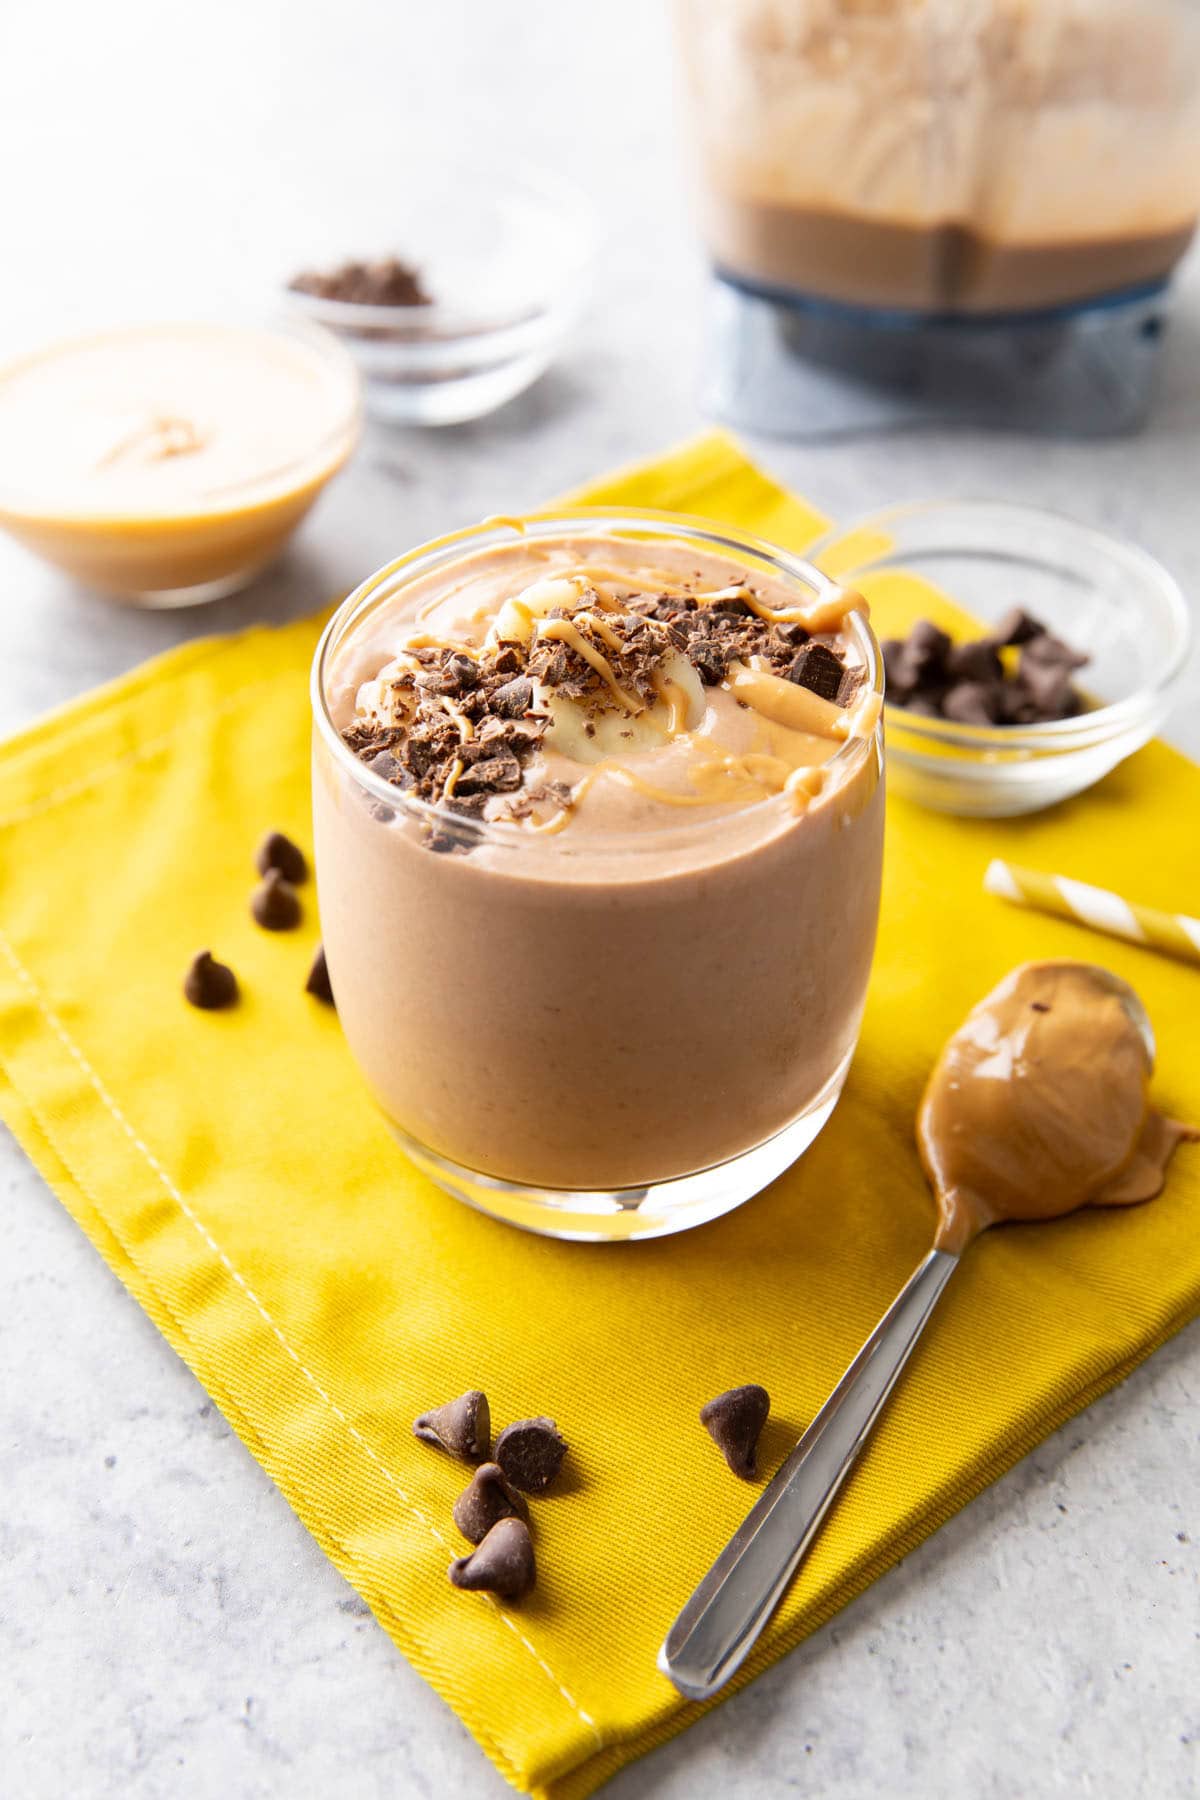 Chocolate peanut butter smoothie served in a glass cup topped with chocolate shavings and peanut butter drizzle